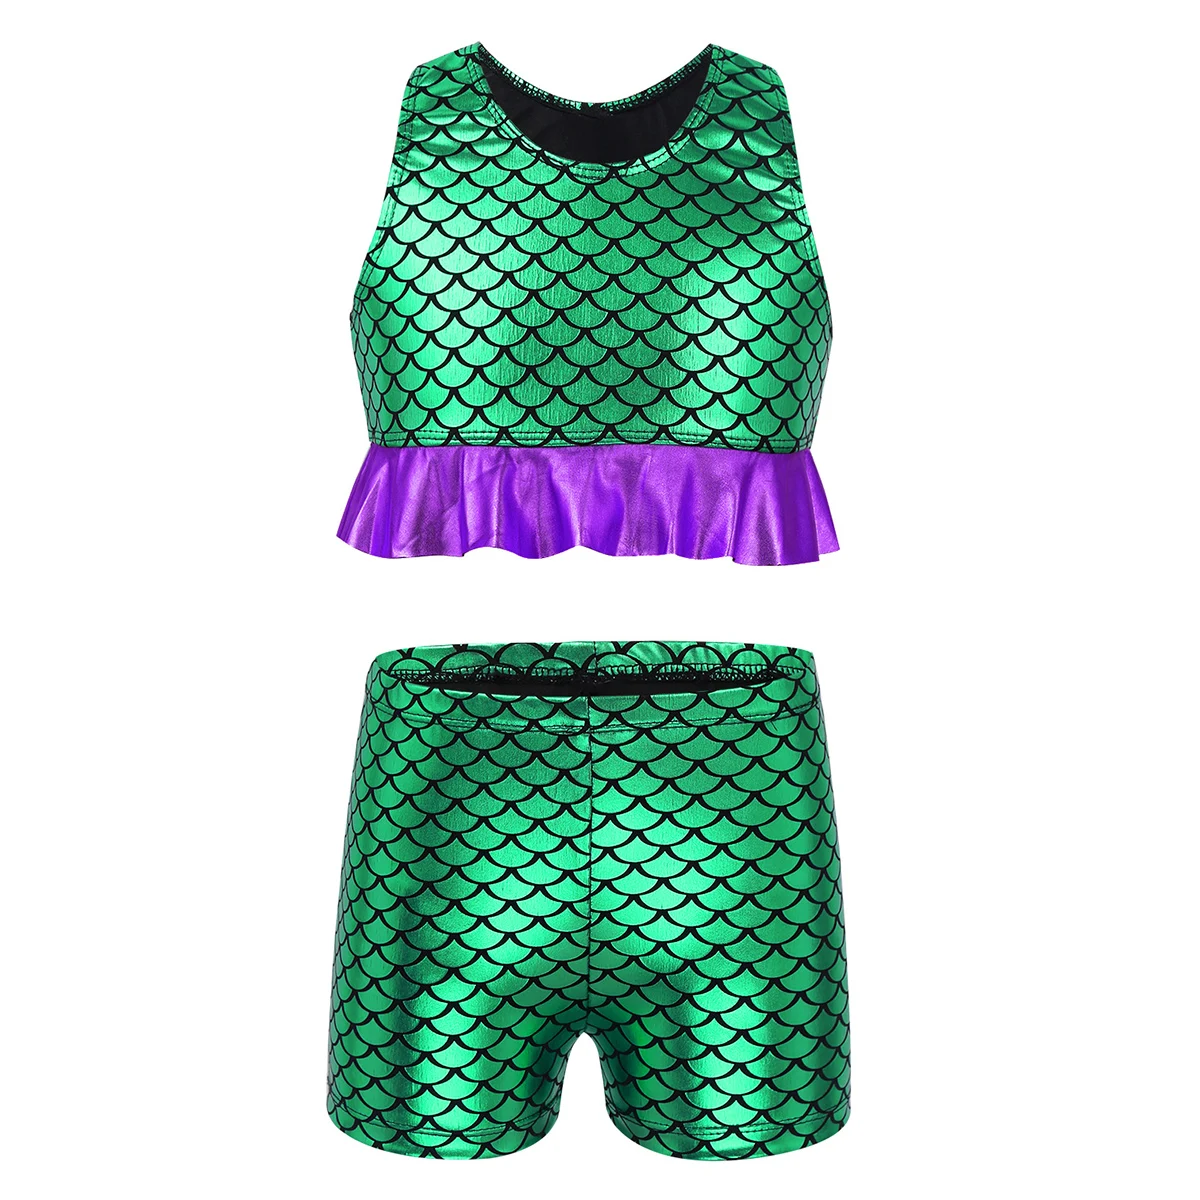 Fish Scales Printed Kids Girls Clothes Set Cute Peplum Crop Tank Top with Shorts Children Dance Gymnastics Cheerleading Outfits